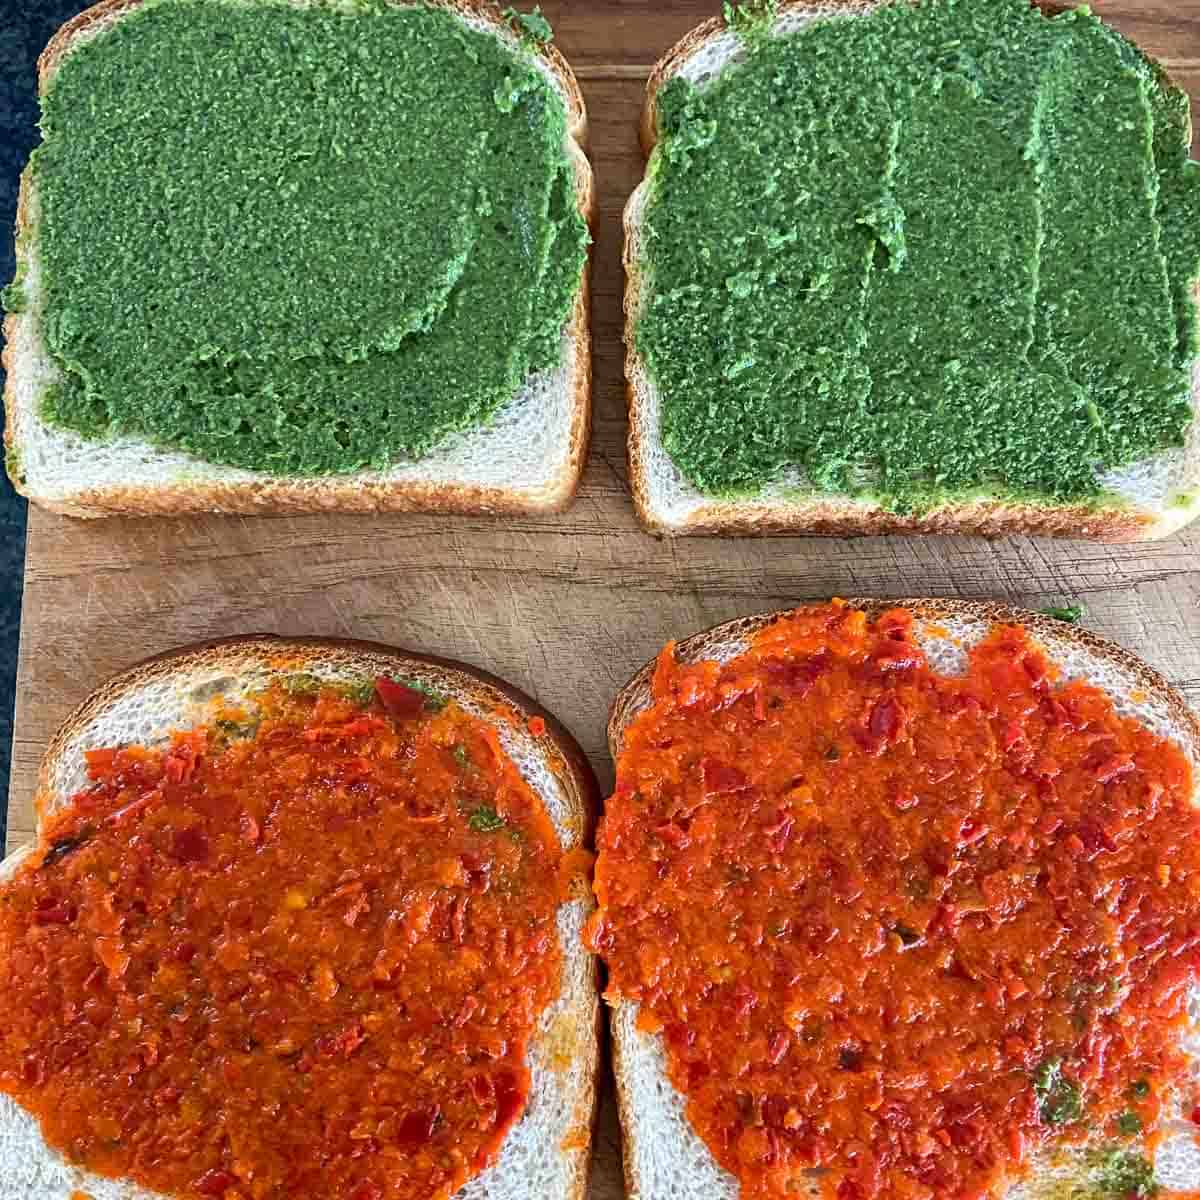 spreading the sauce on the sandwich